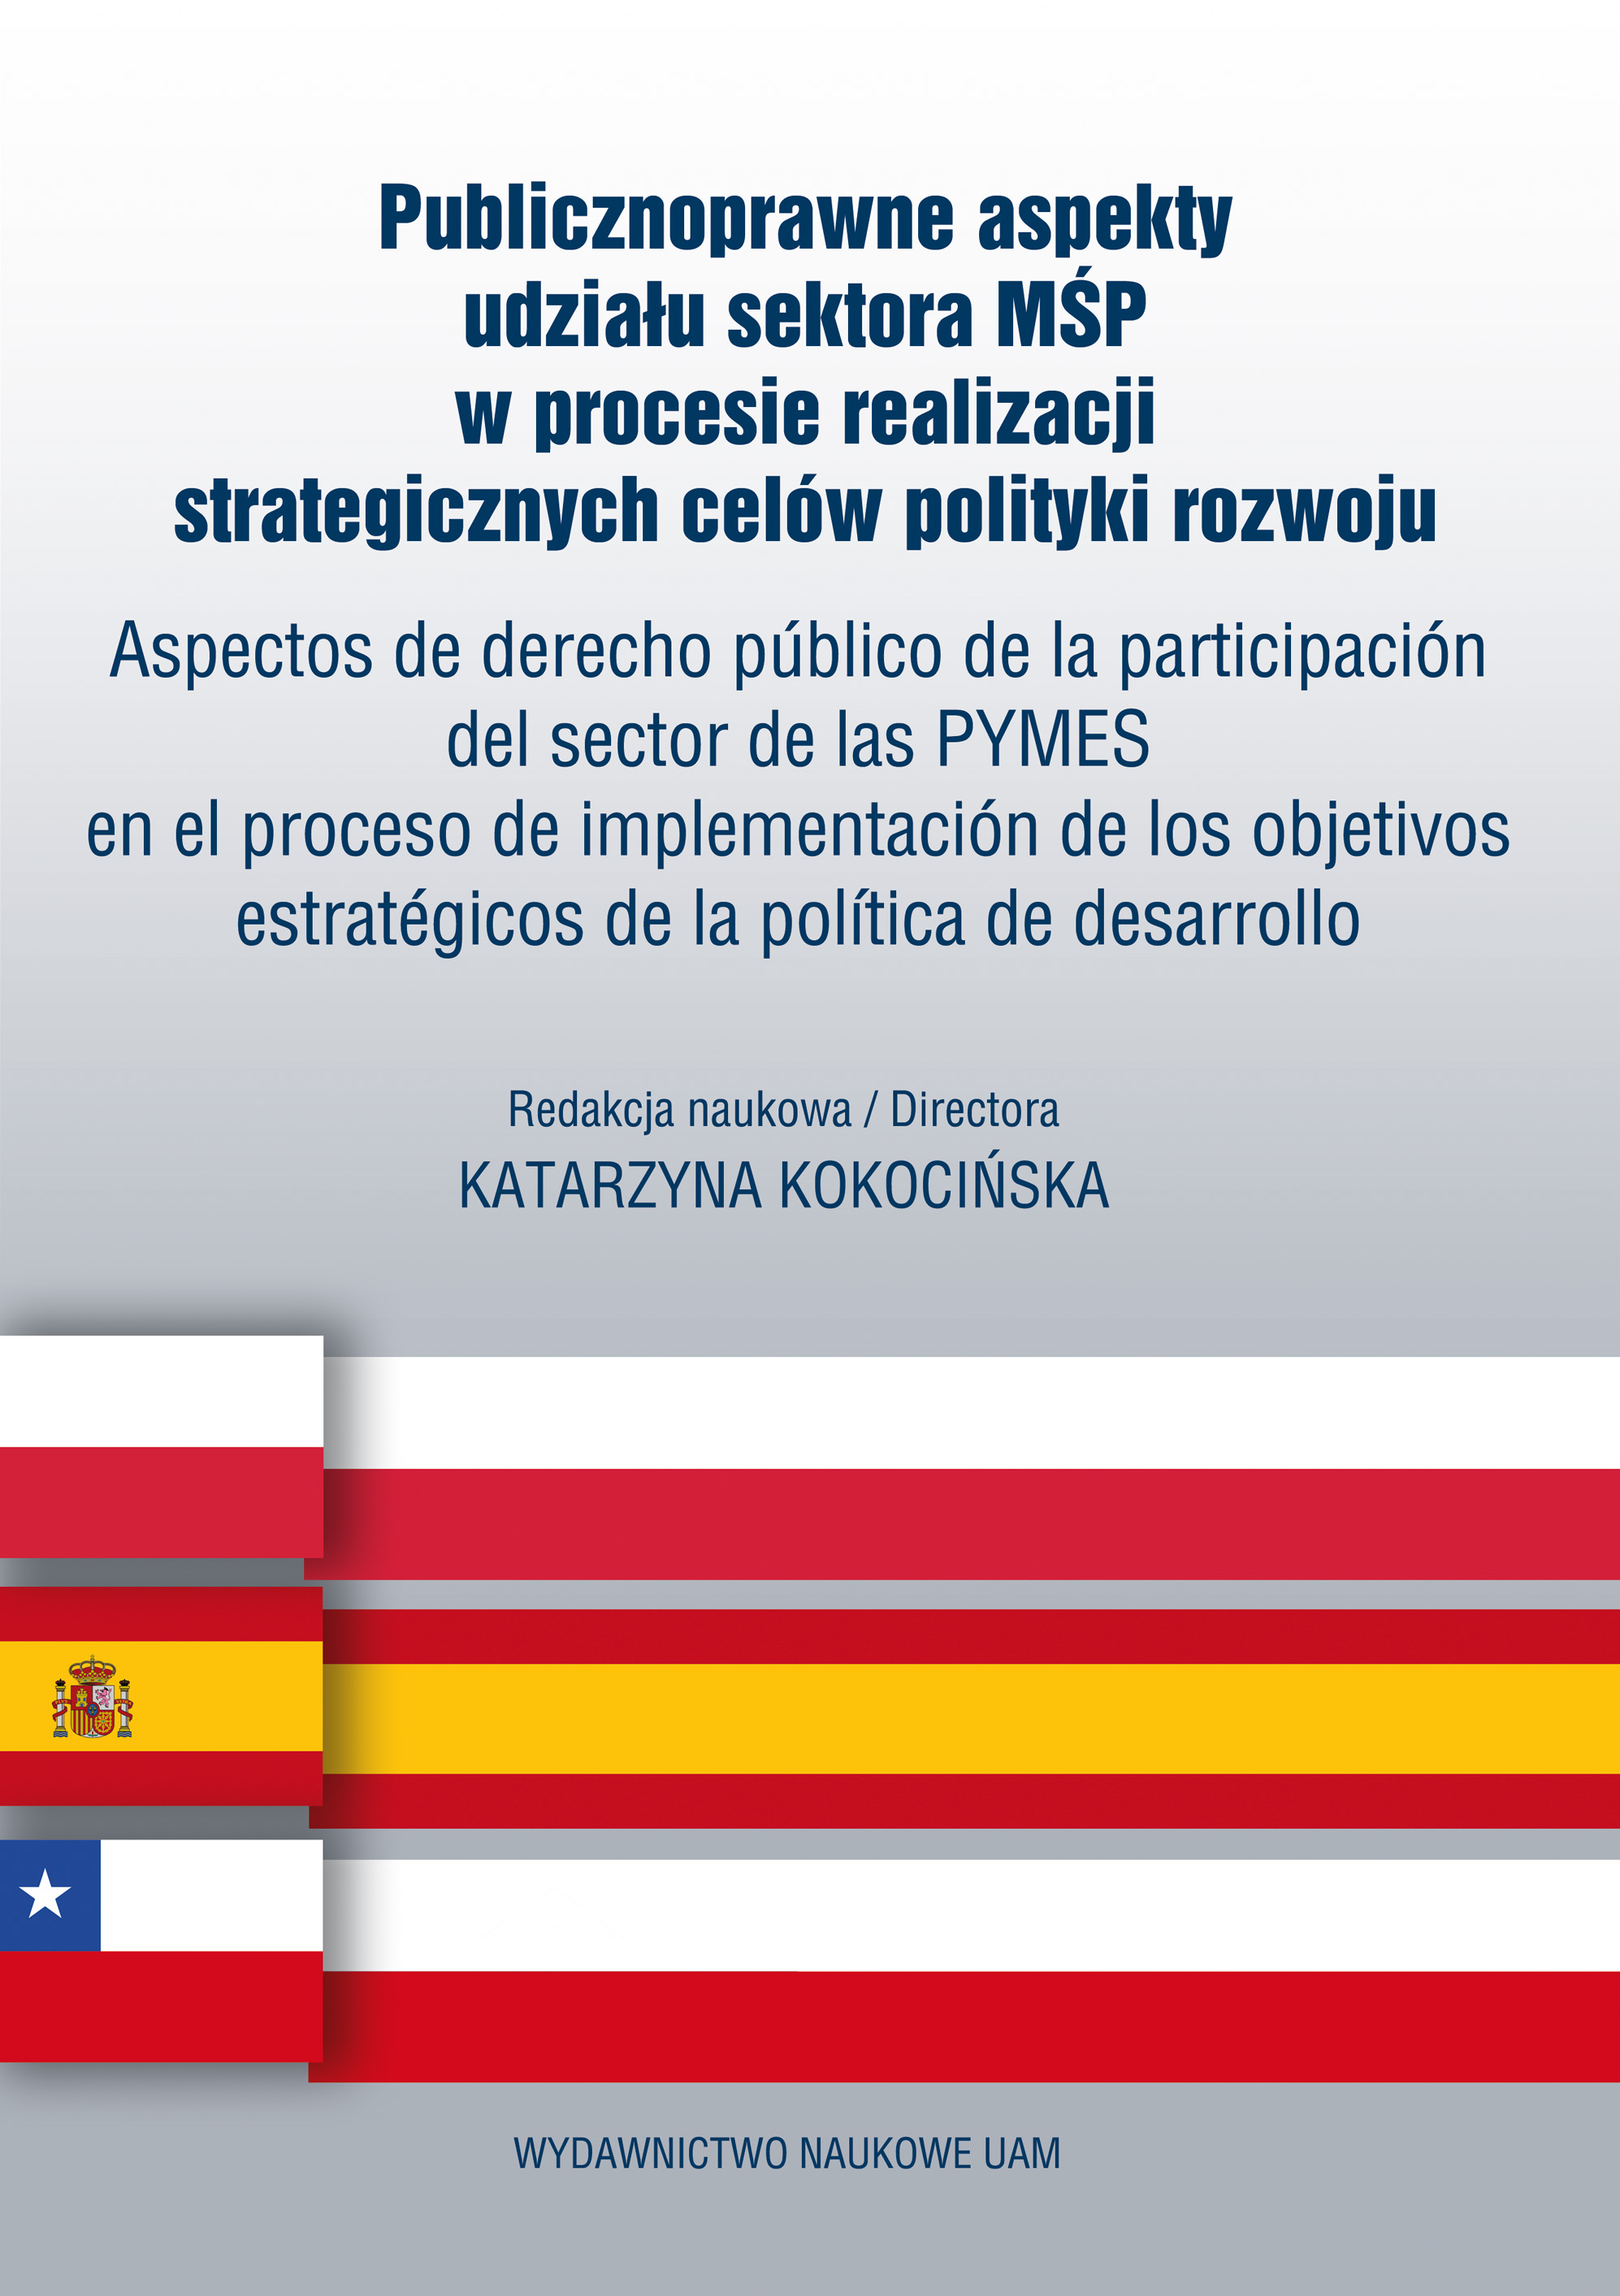 Public-law aspects of the participation of the SME sector in the process of achieving strategic goals of development policy